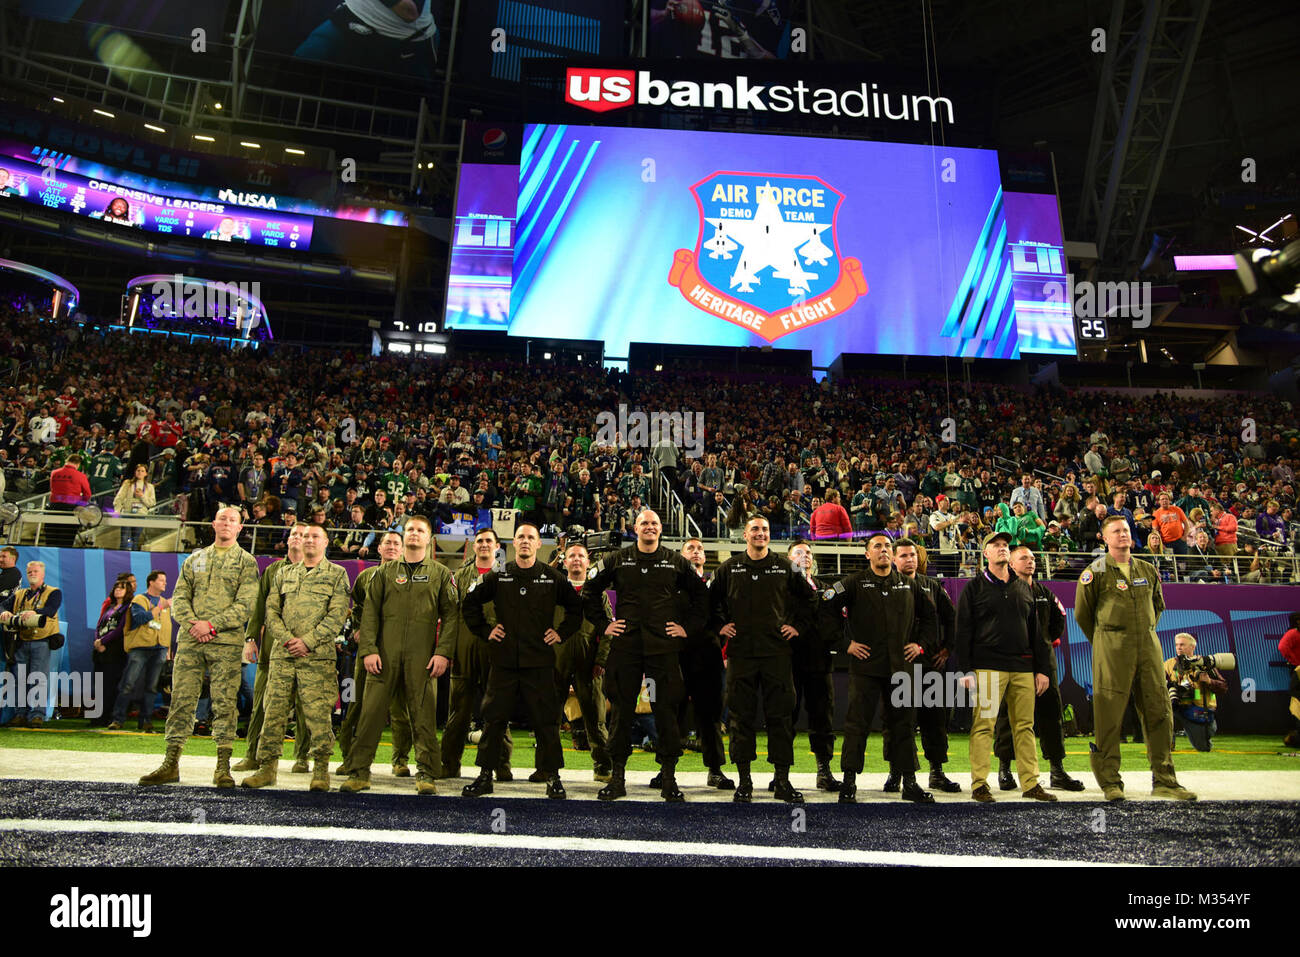 U.S. Air Force Airmen from the F-16 Viper Demonstration Team, A-10C Thunderbolt II Demonstration Team, and the Air Combat Command Aerial Control Team are recognized on the field during Super Bowl 52 at U.S. Bank Stadium in Minneapolis, Minn., Feb. 4th, 2018. ACC Aerial events coordinated a Heritage Flight flyover during the opening ceremonies of the game that both the demo teams and the Air Force Heritage Flight Foundation supported. (U.S. Air Force Stock Photo